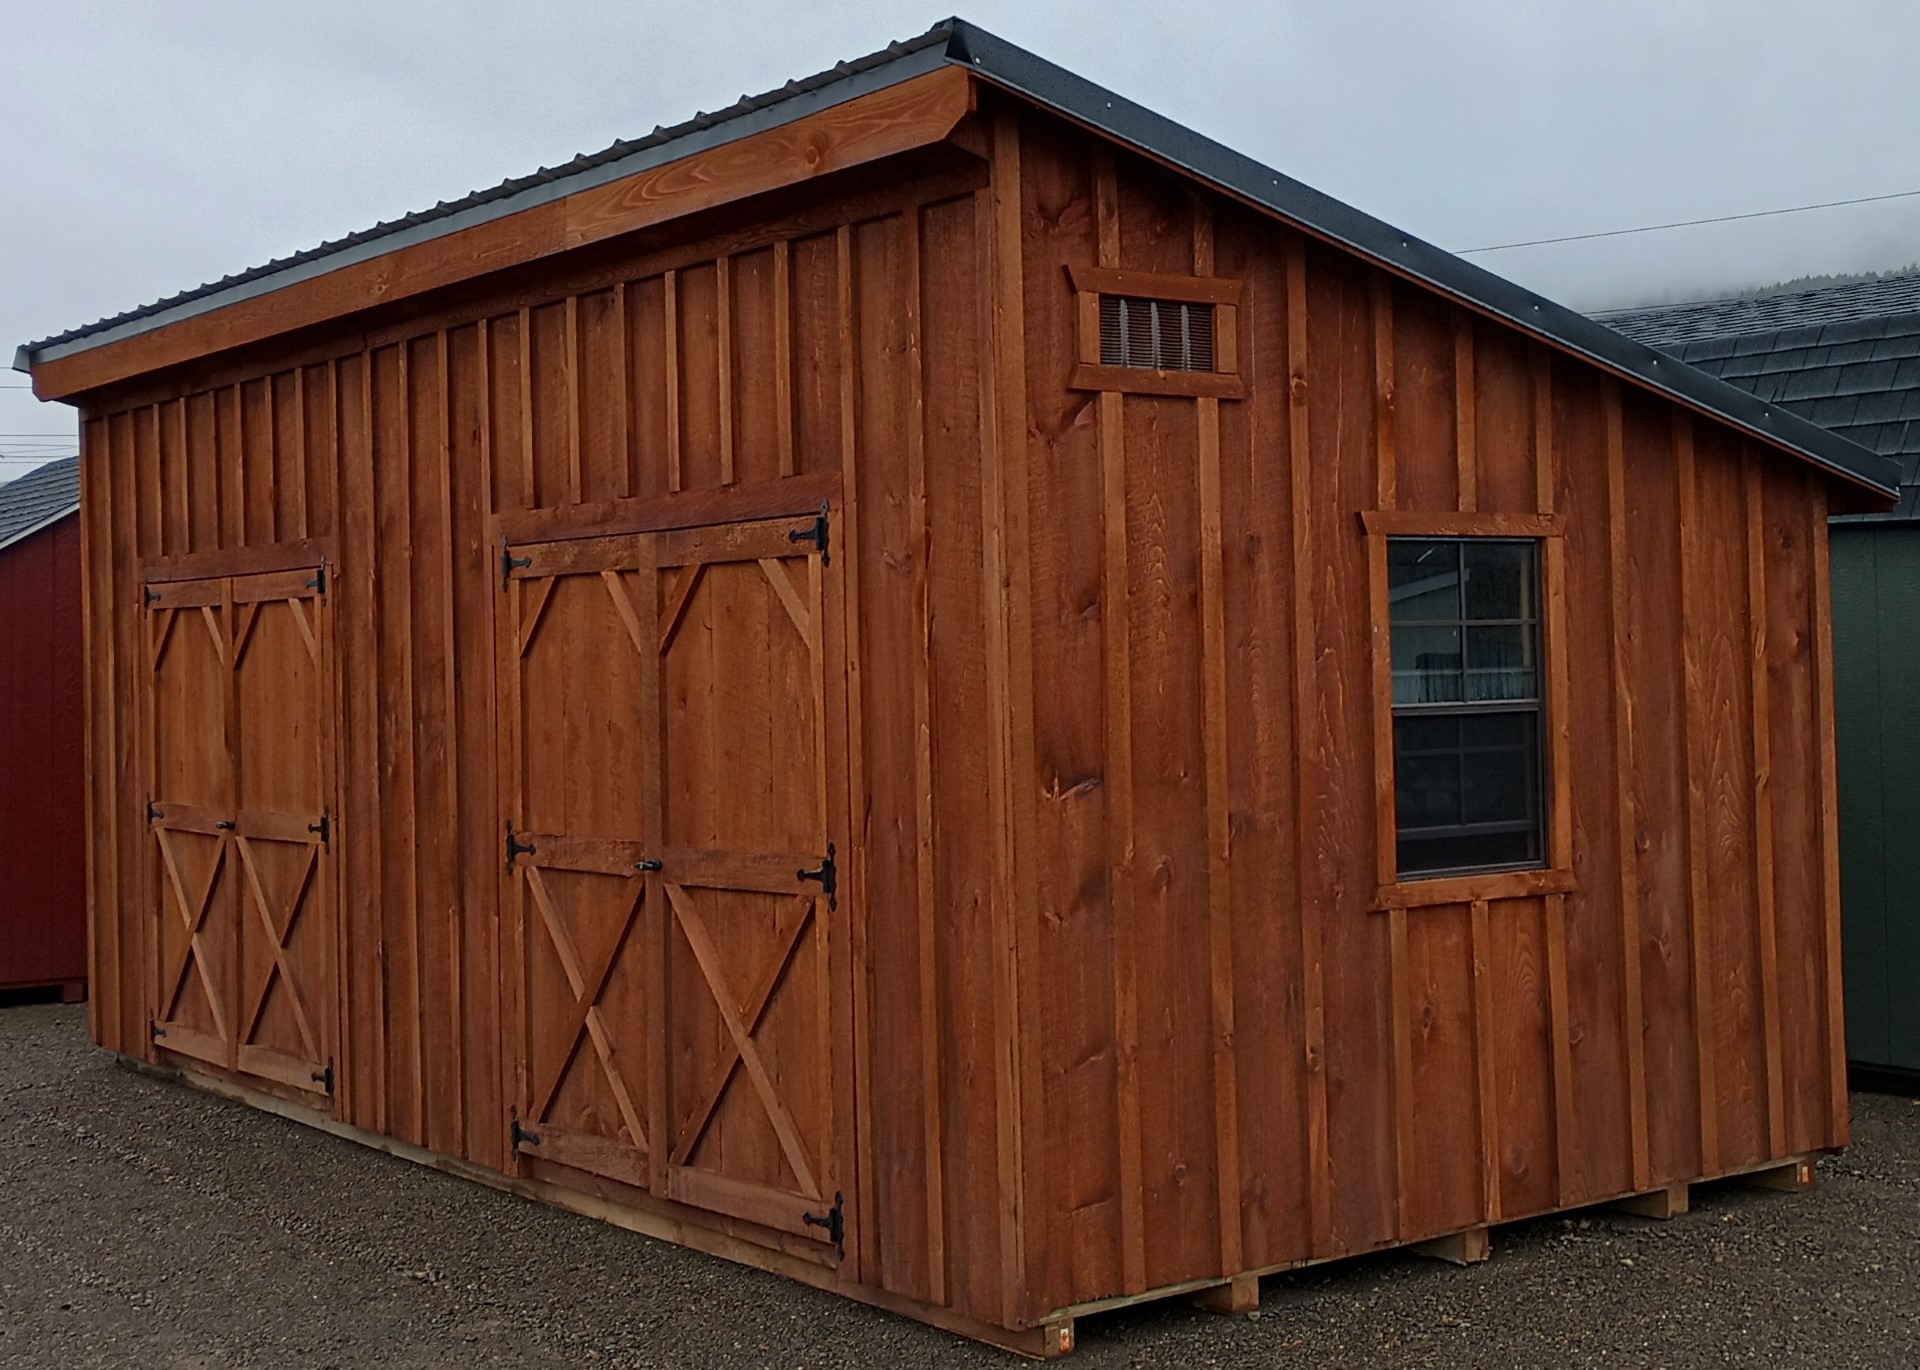 Large one slant building with board & batten siding and two sets of double doors